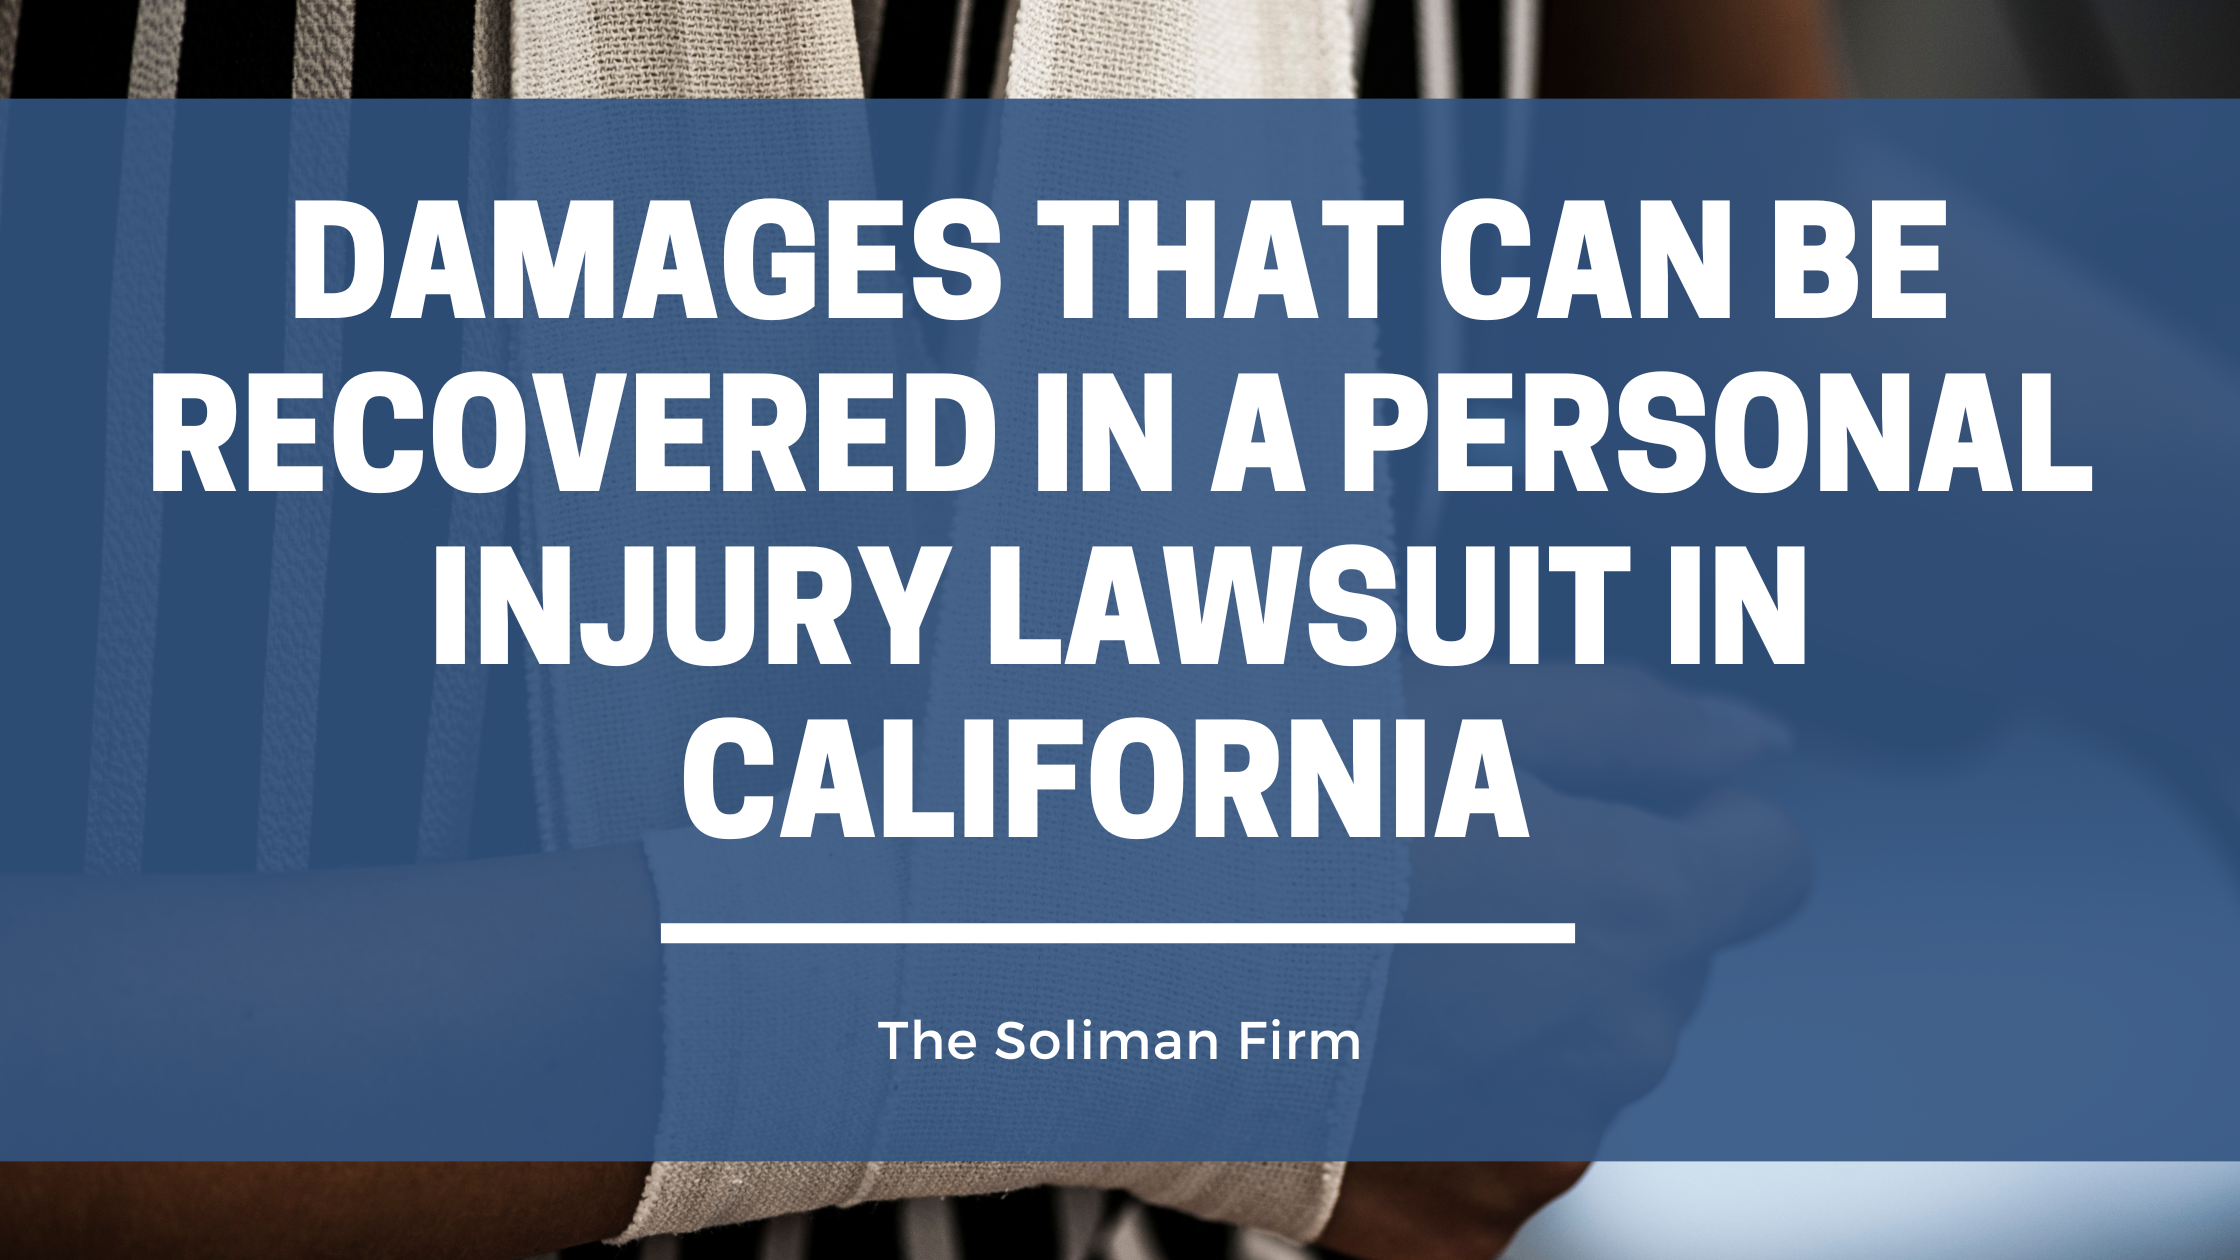 Damages that can be recovered in a personal injury lawsuit in California 